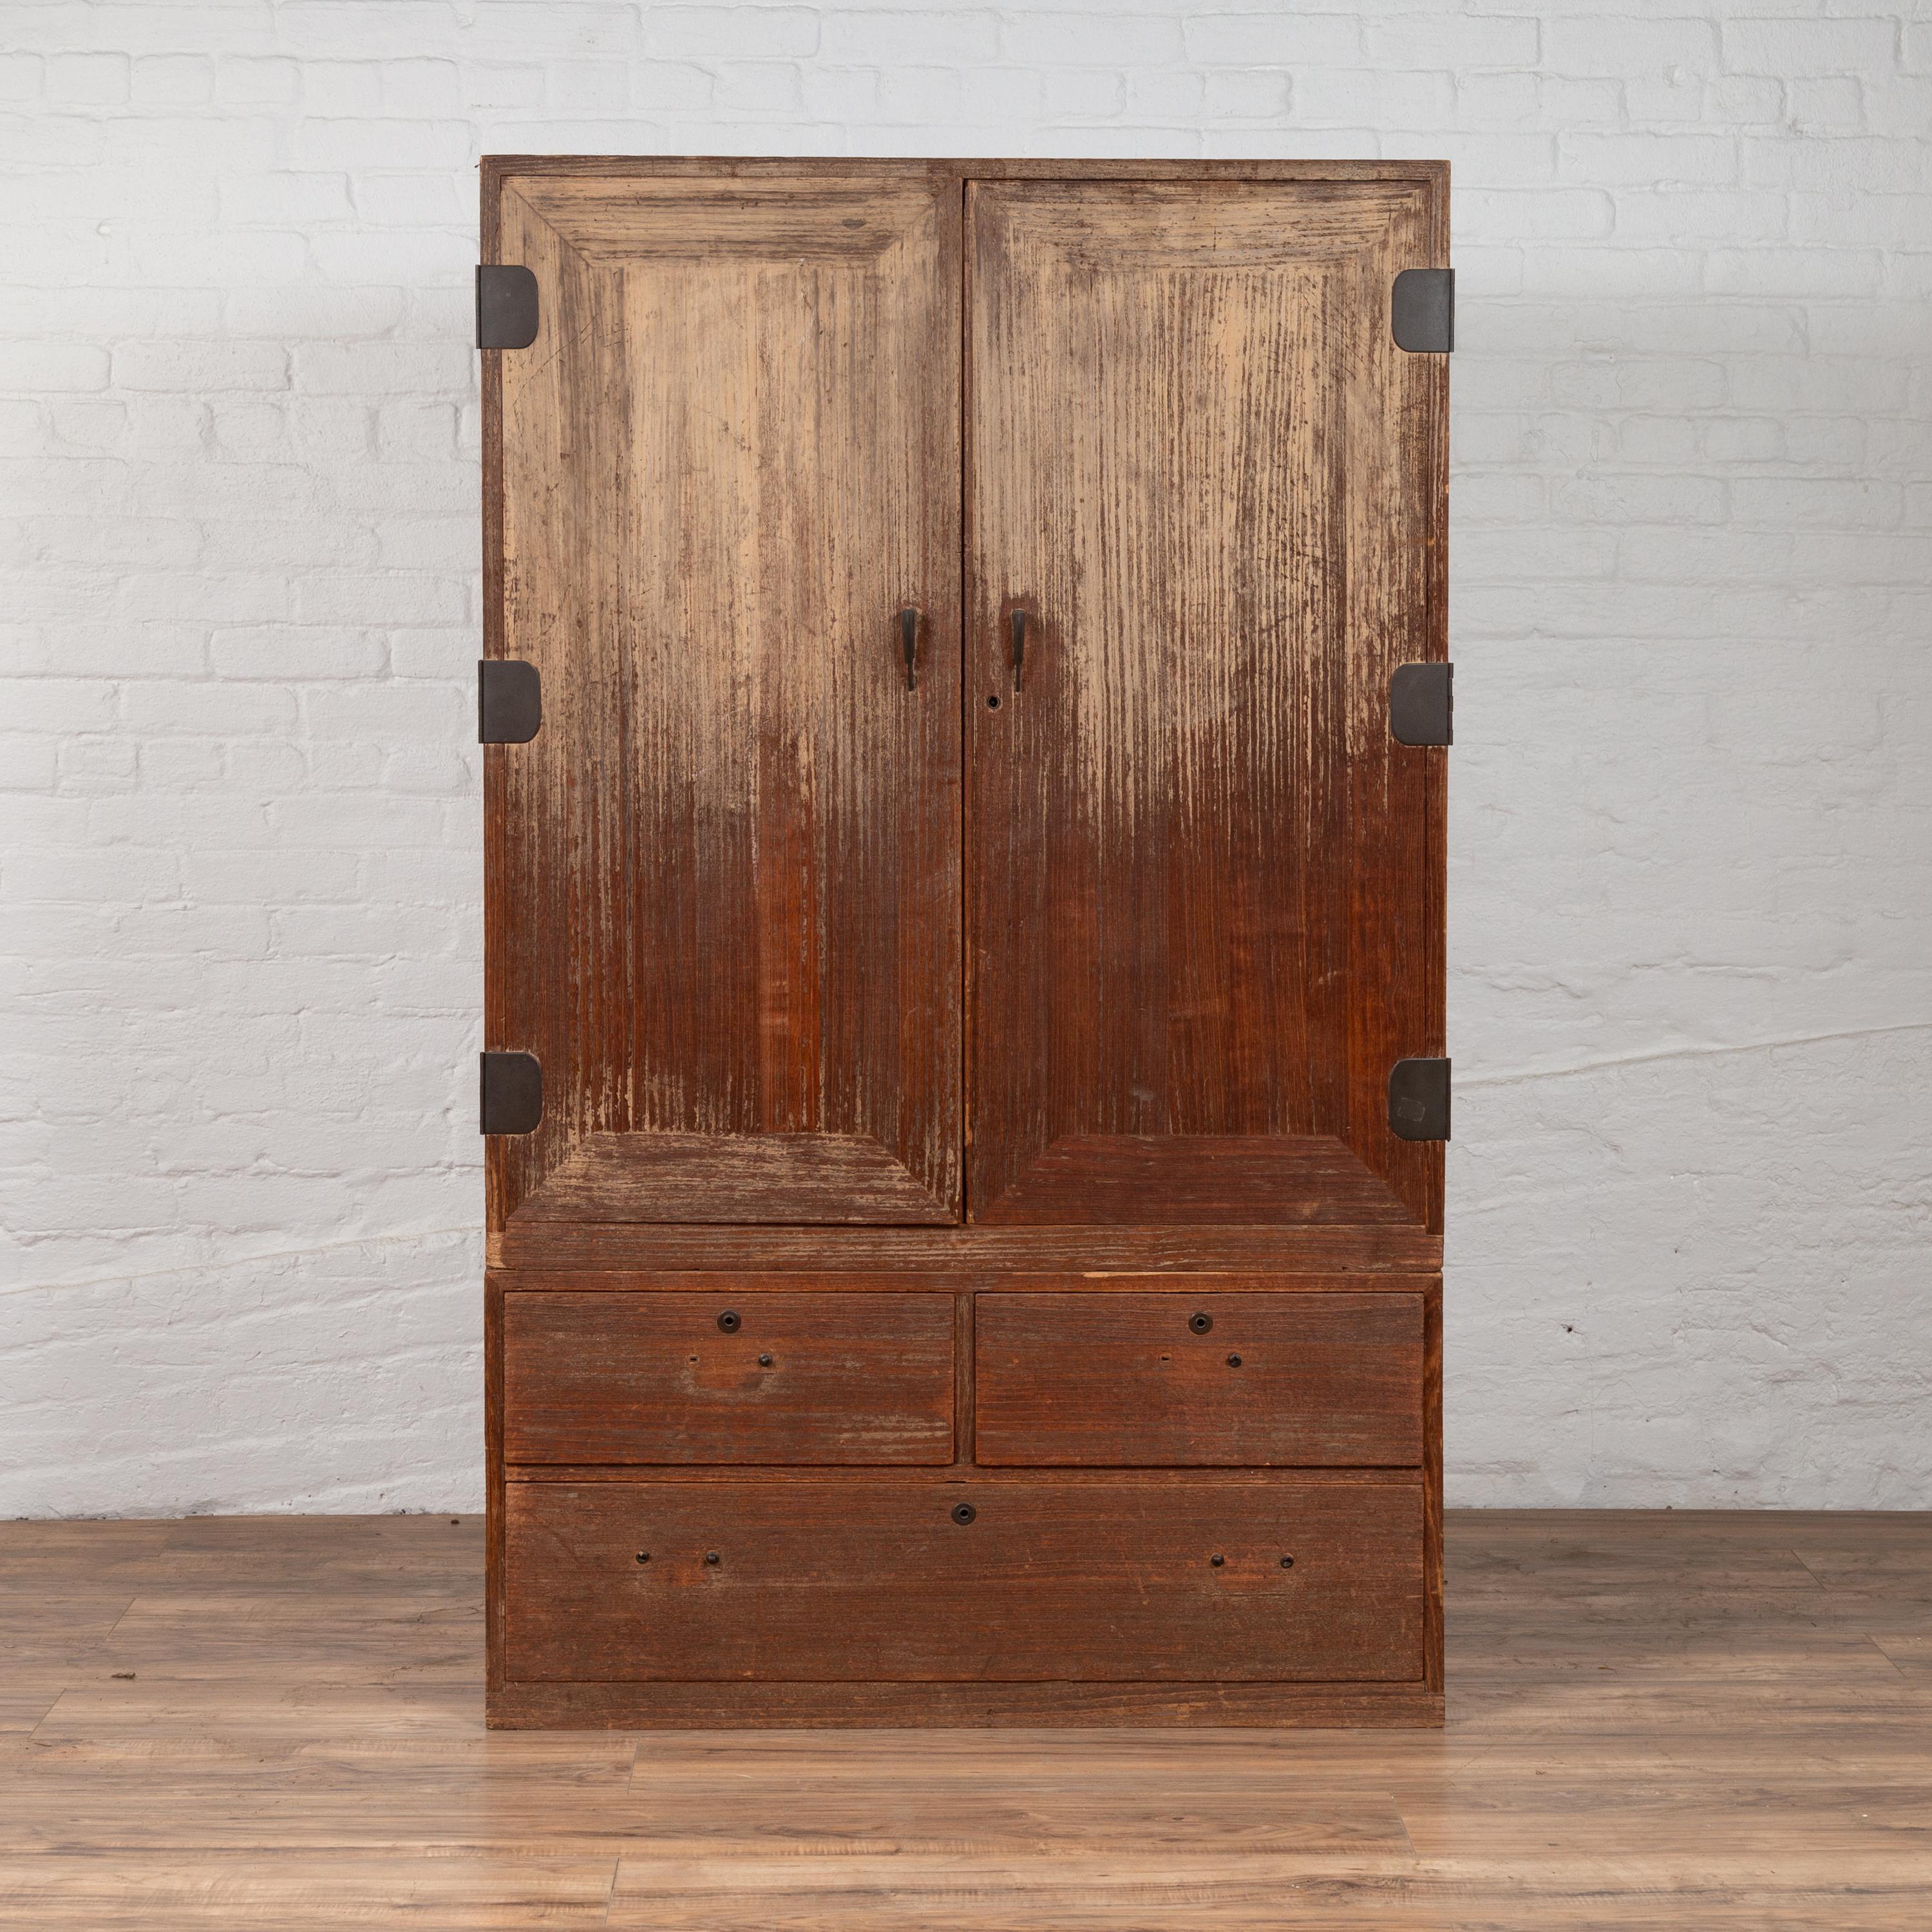 An antique Japanese two-section kiri wood wardrobe from the 19th century, with ombre finish. Born in Japan during the 19th century, this exquisite kiri wood armoire is made of two separate sections which, placed above one another, create a beautiful